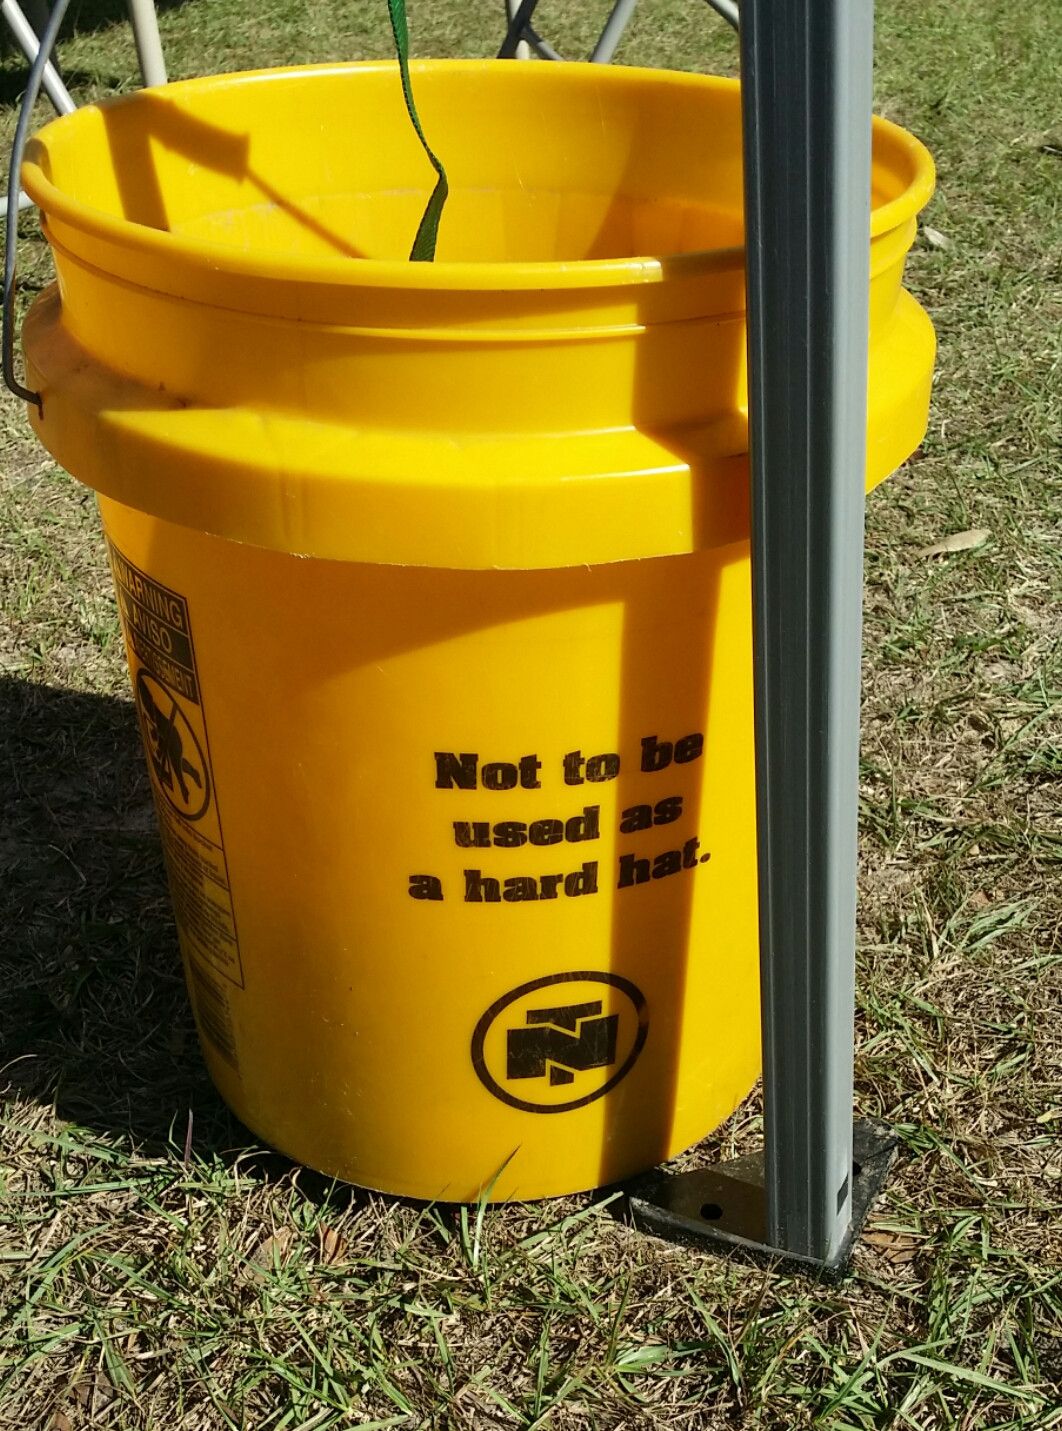 The warning on this bucket leads me to believe this is a recurring problem.